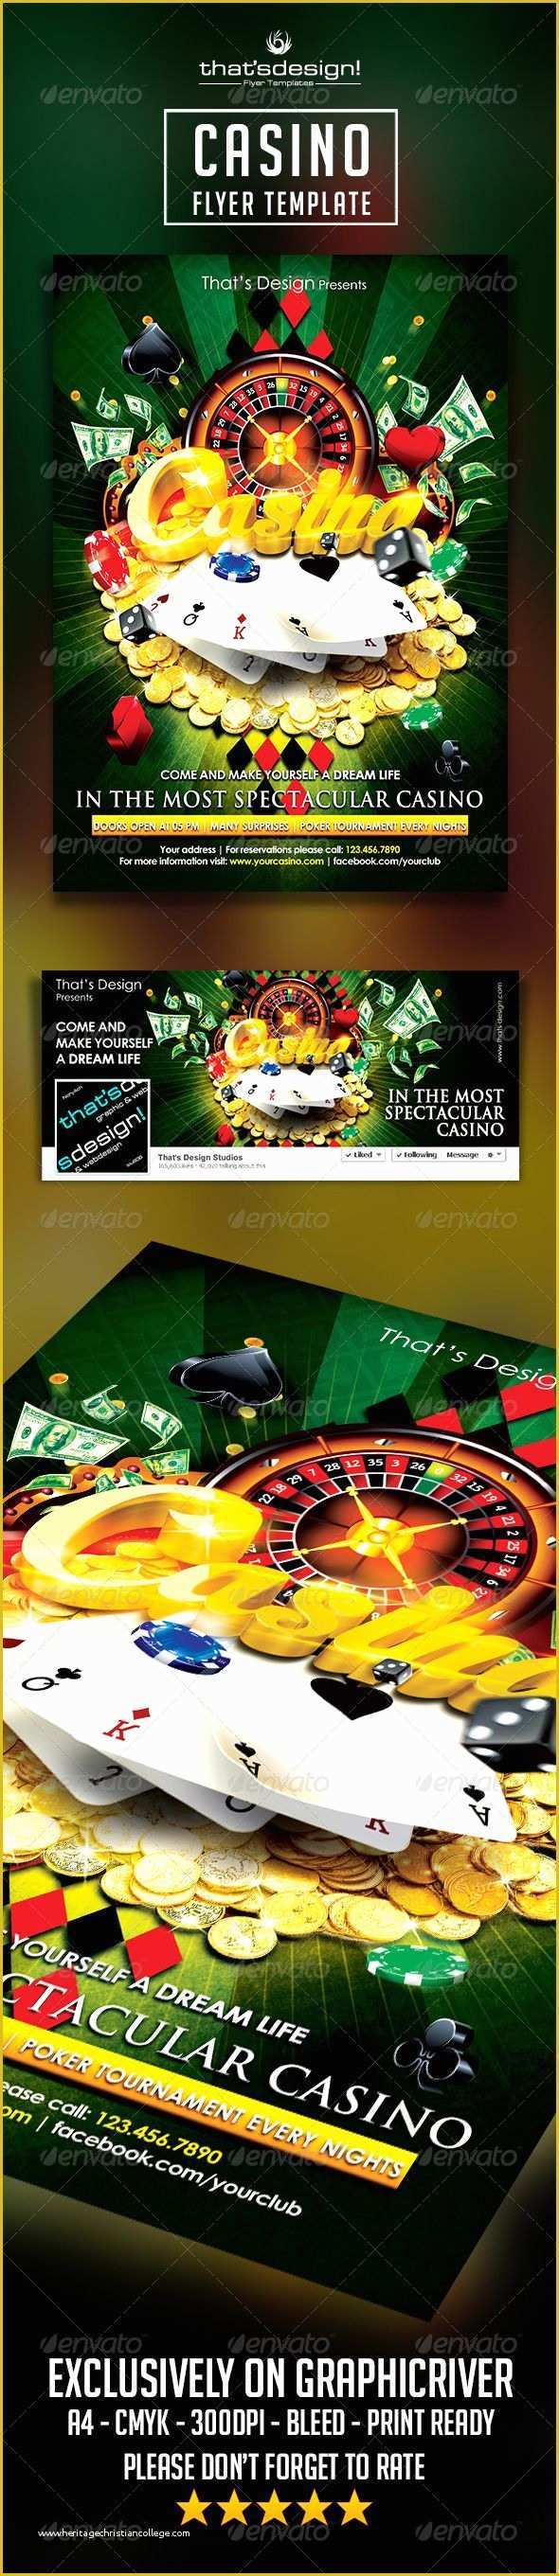 Casino Flyer Template Free Of 170 Best Images About Casino Infographics On Pinterest